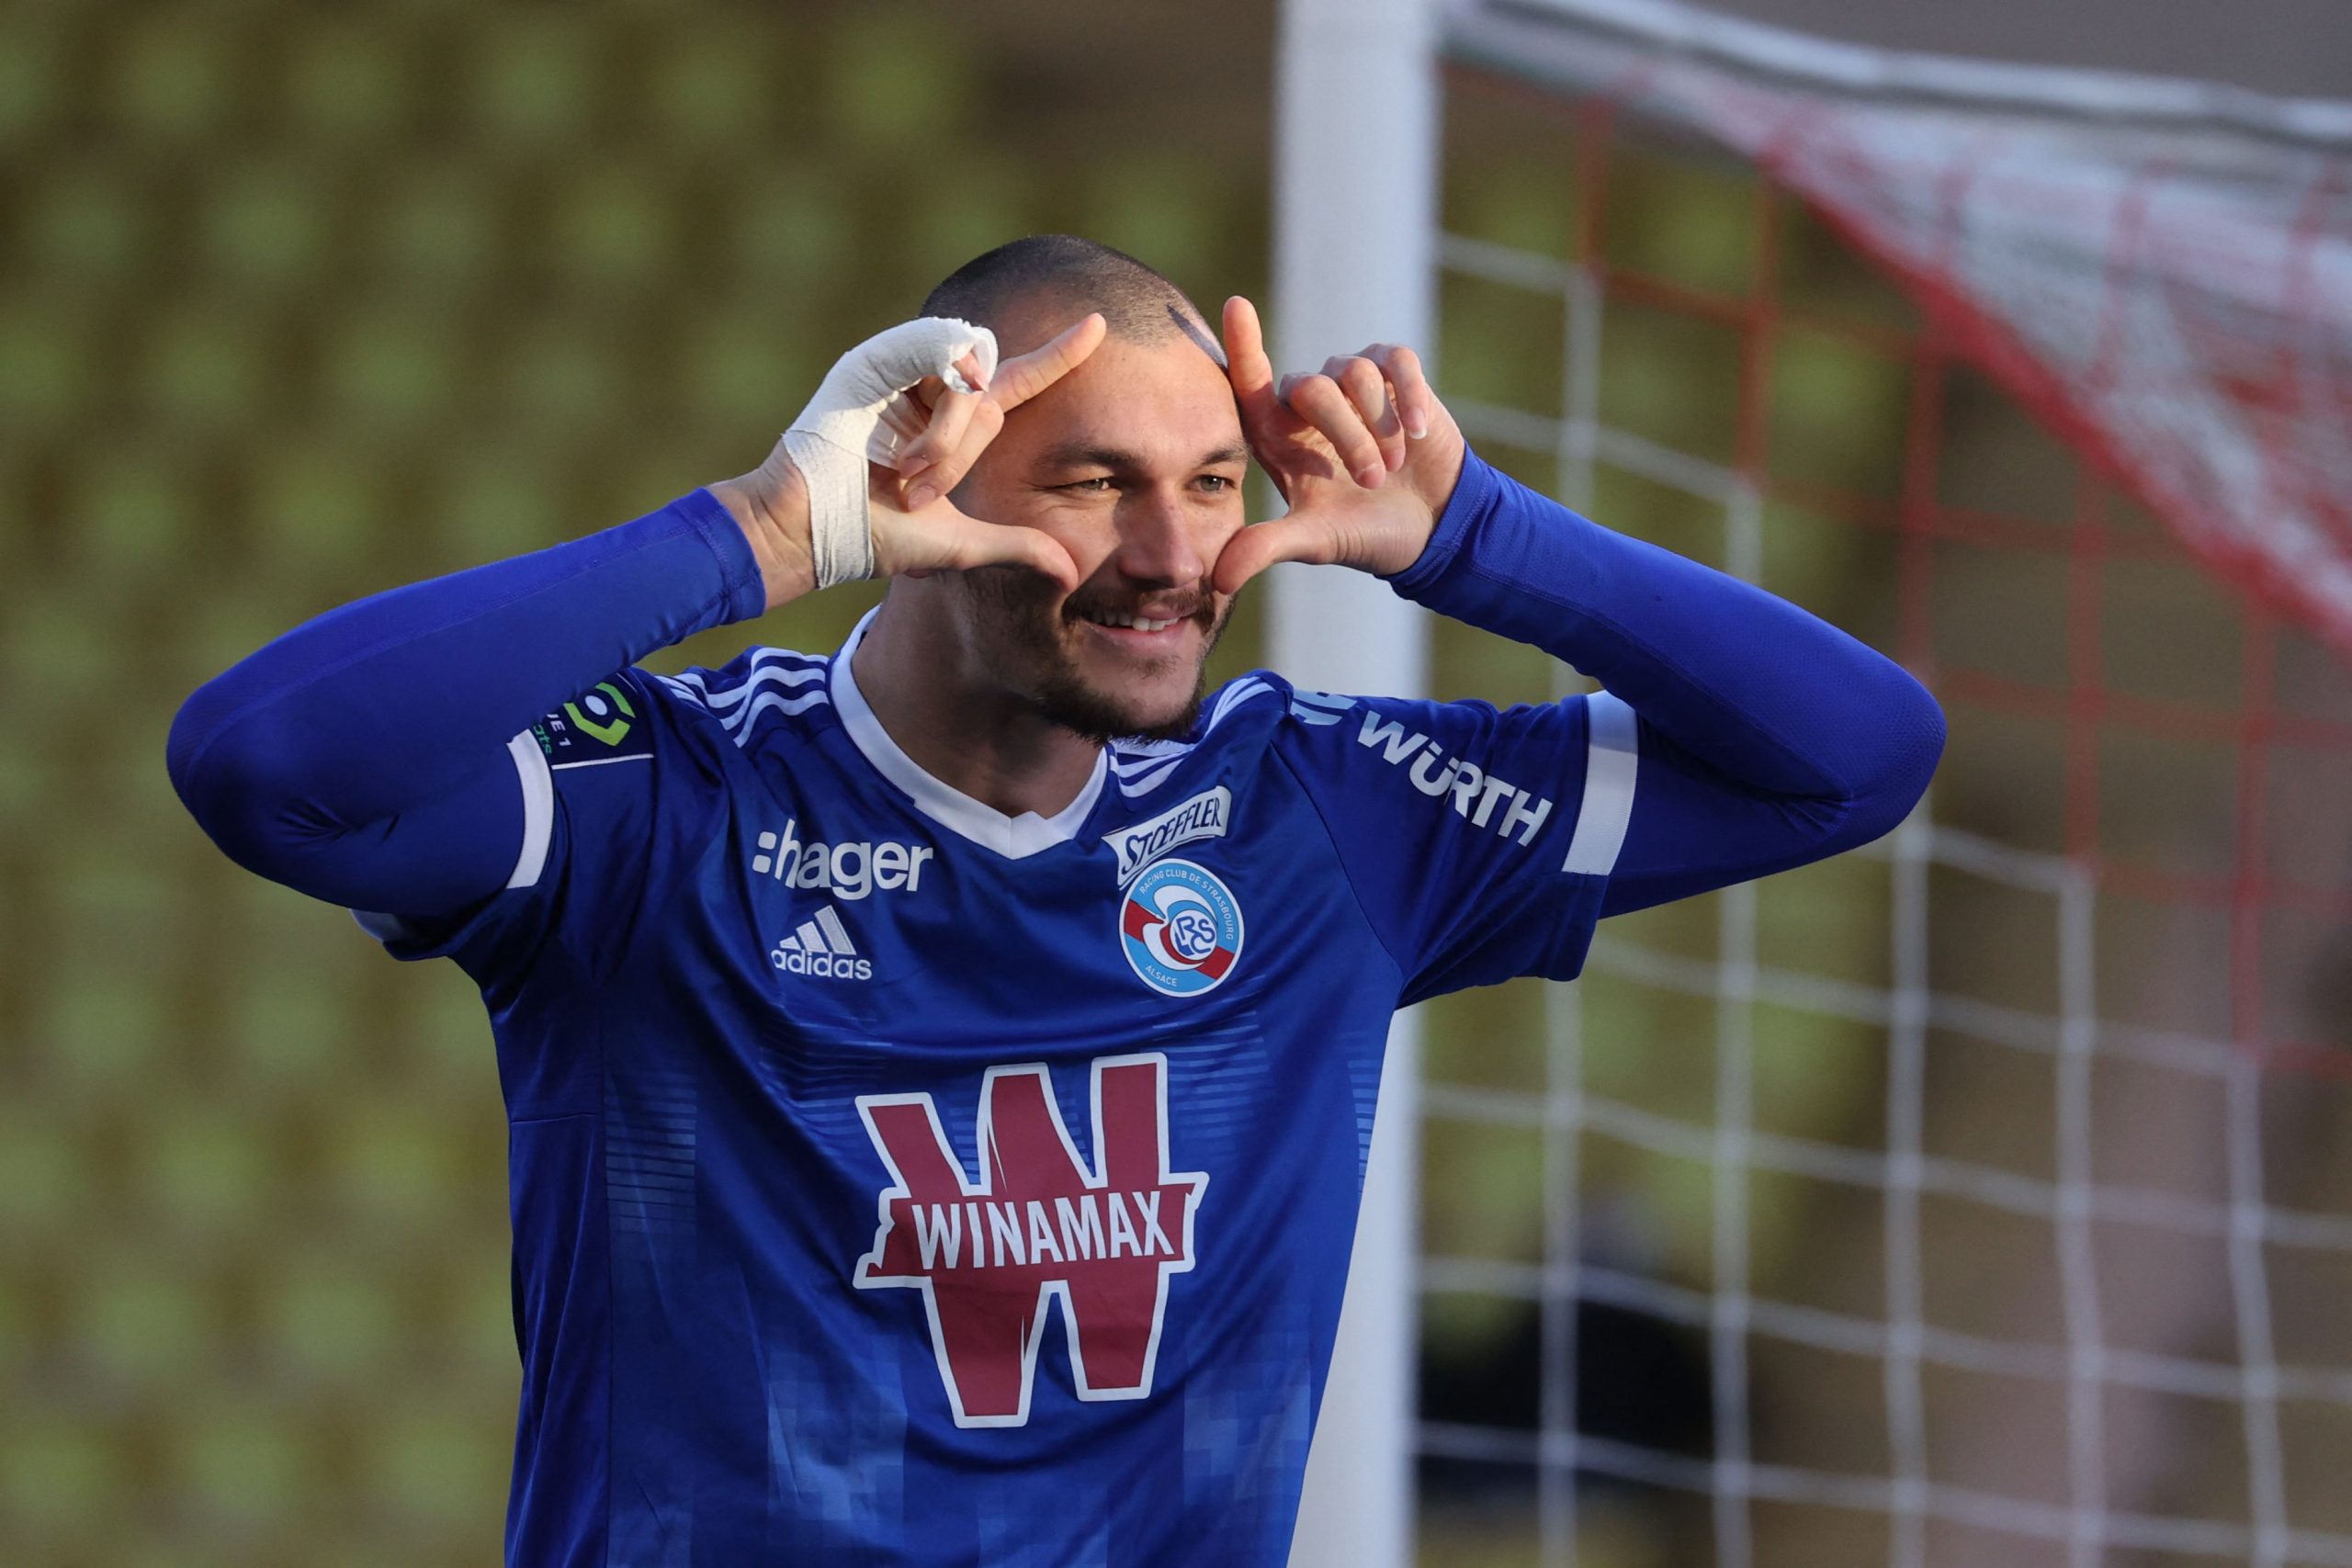 Strasbourg's French forward Ludovic Ajorque (R) celebrates after scoring a penalty during the French L1 football match between AS Monaco and Strasbourg at "Louis II" stadium in Monaco, on November 28, 2021. (Photo by Valery HACHE / AFP) (Photo by VALERY HACHE/AFP via Getty Images)The 4th Official uses images provided by the following image agency: Getty Images (https://www.gettyimages.de/) Imago Images (https://www.imago-images.de/)